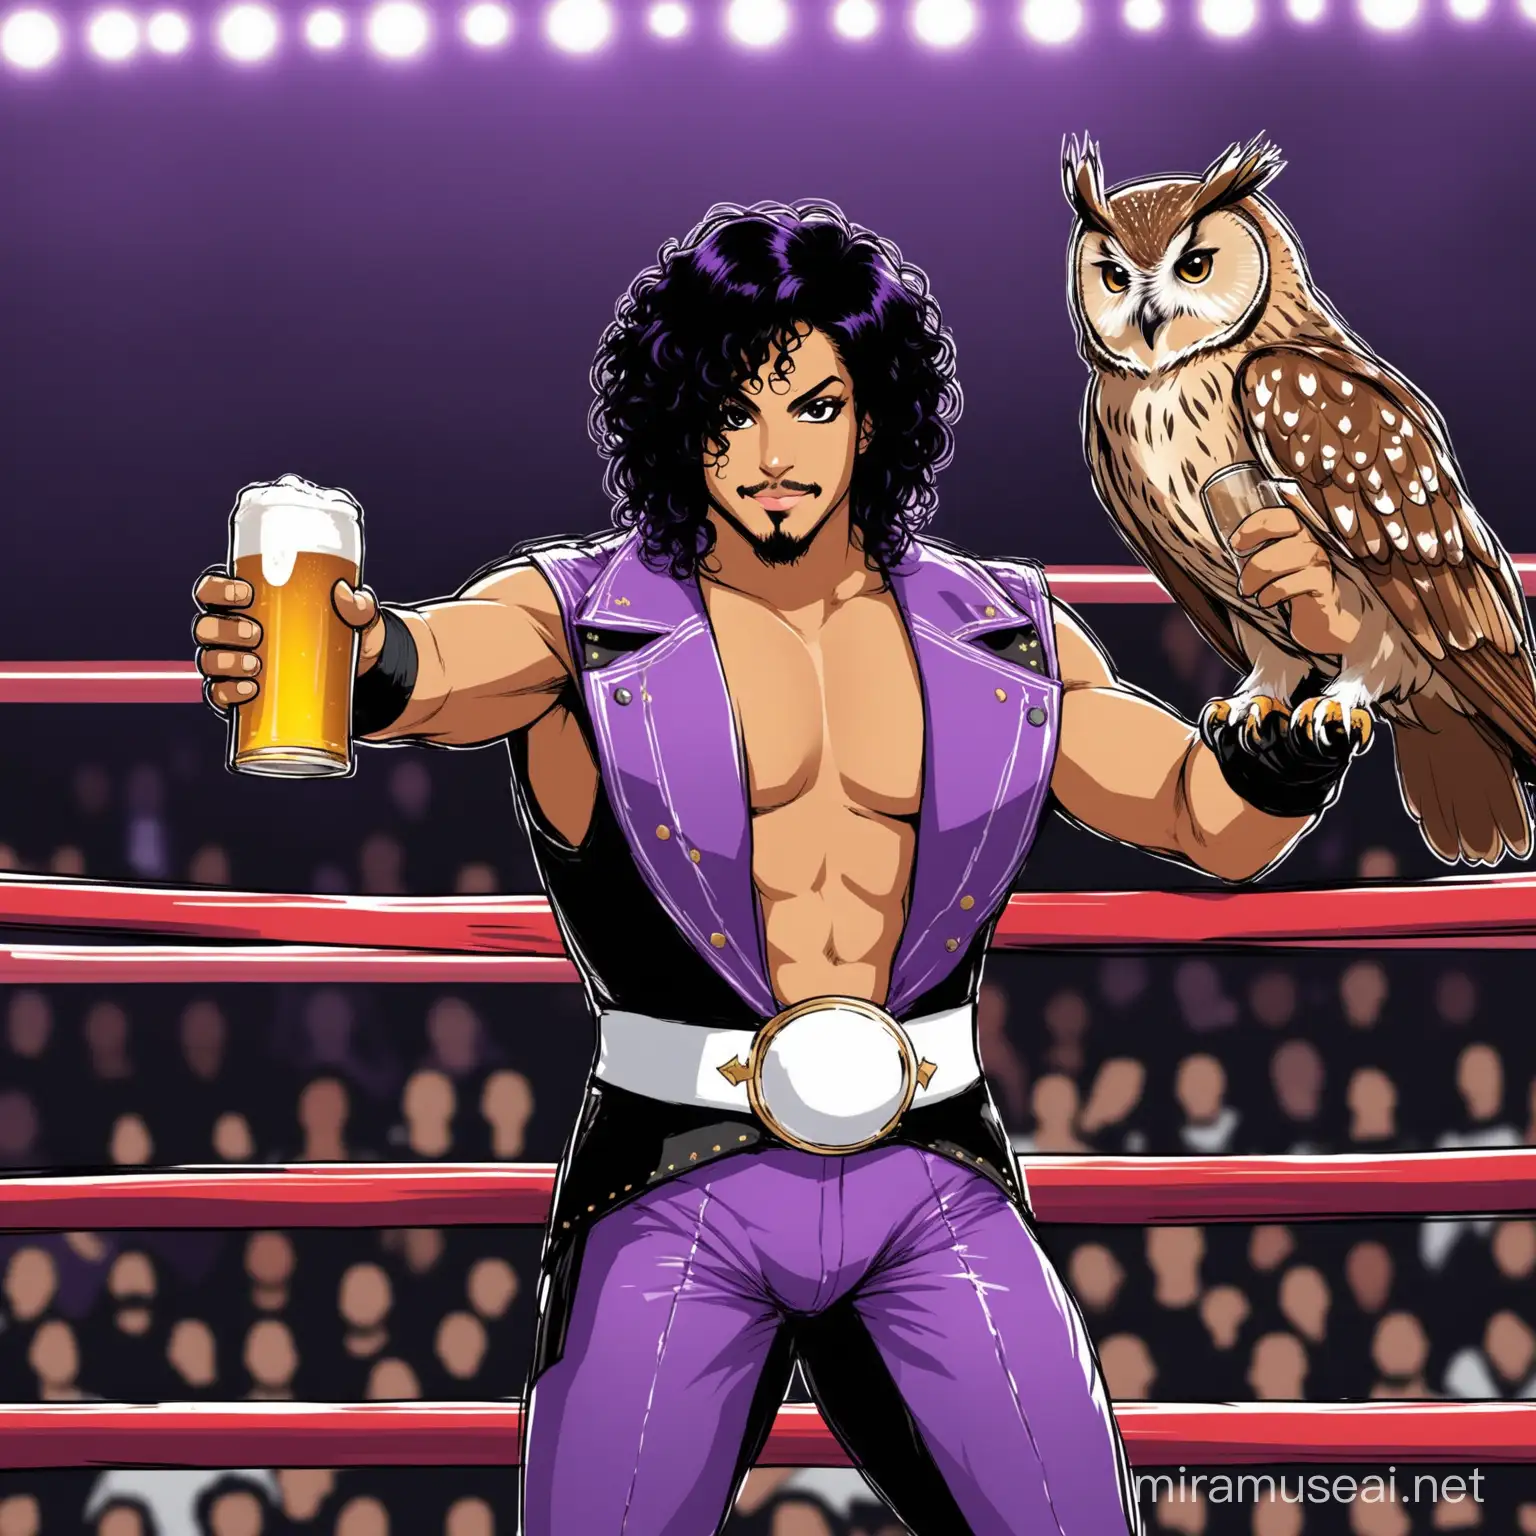 Prince and Owl Enjoying Beers in Wrestling Ring